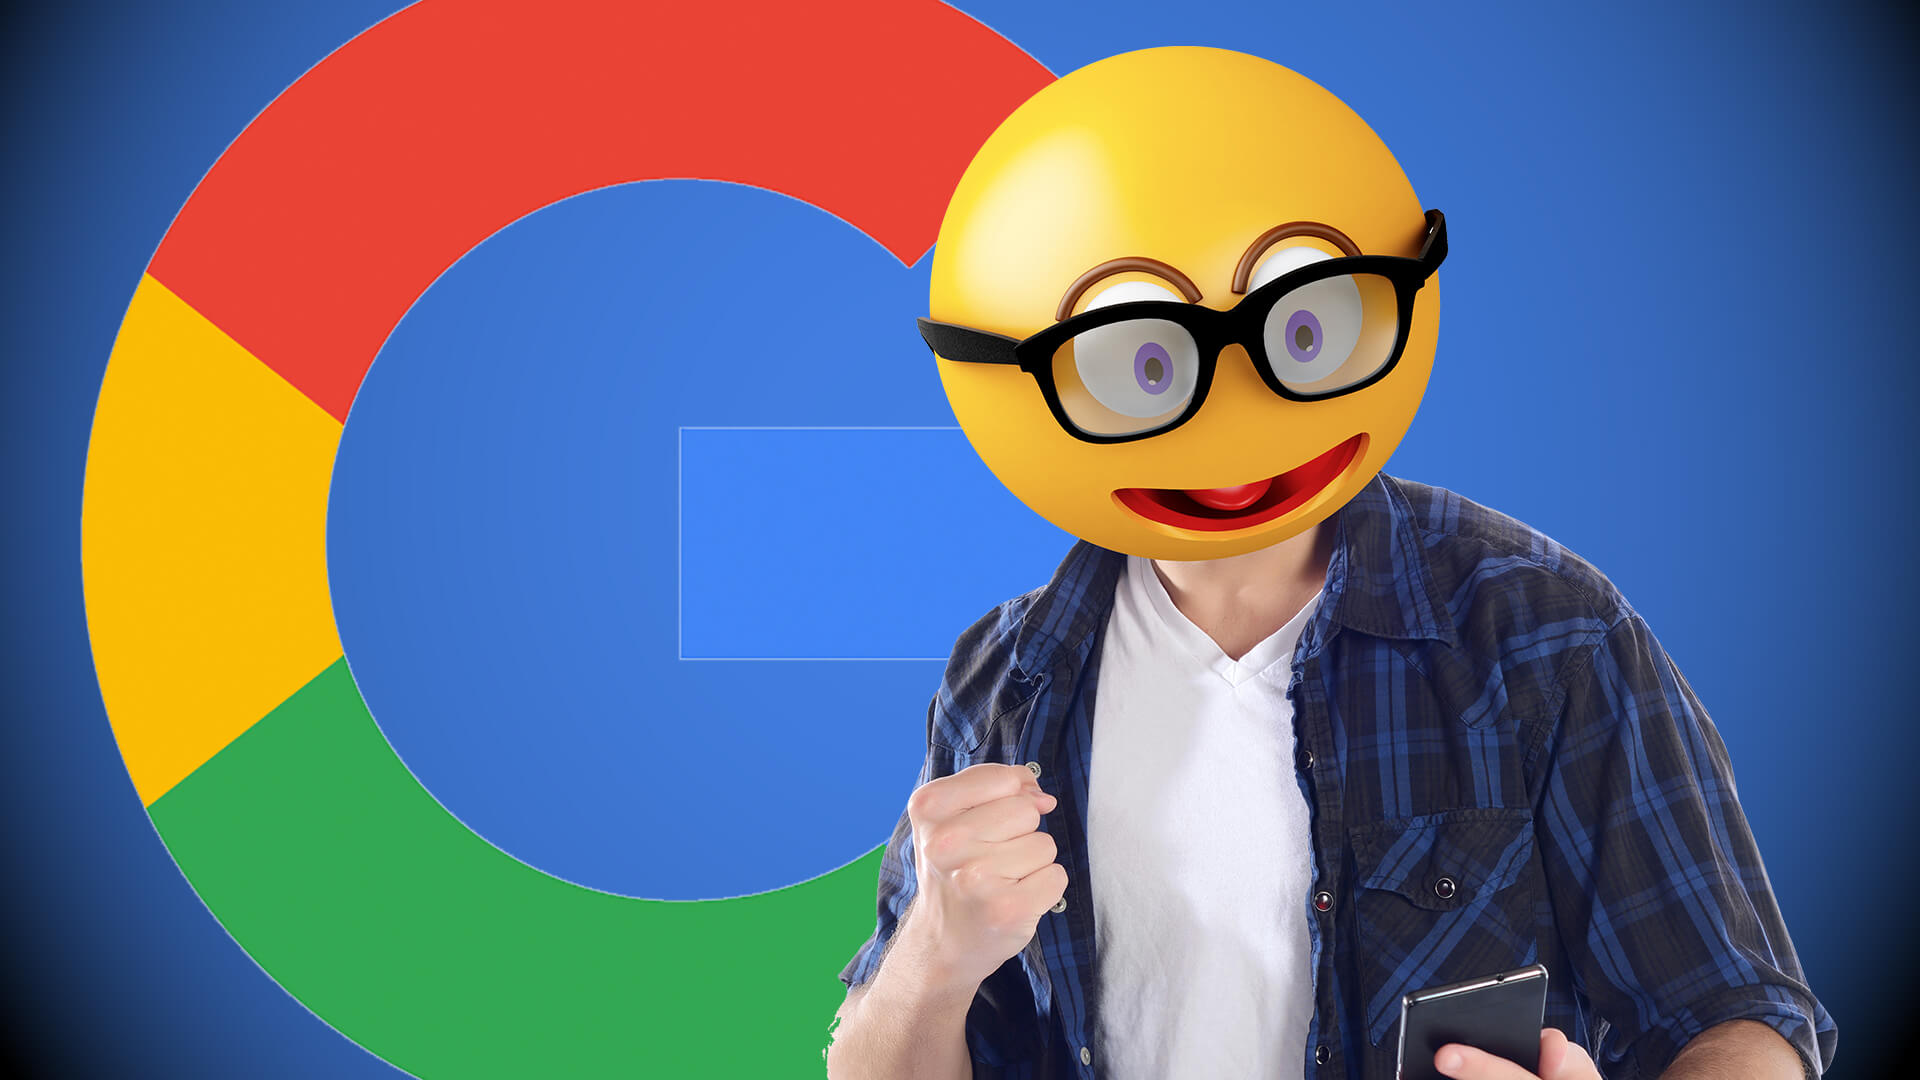 Emoji SEO presents opportunities for video